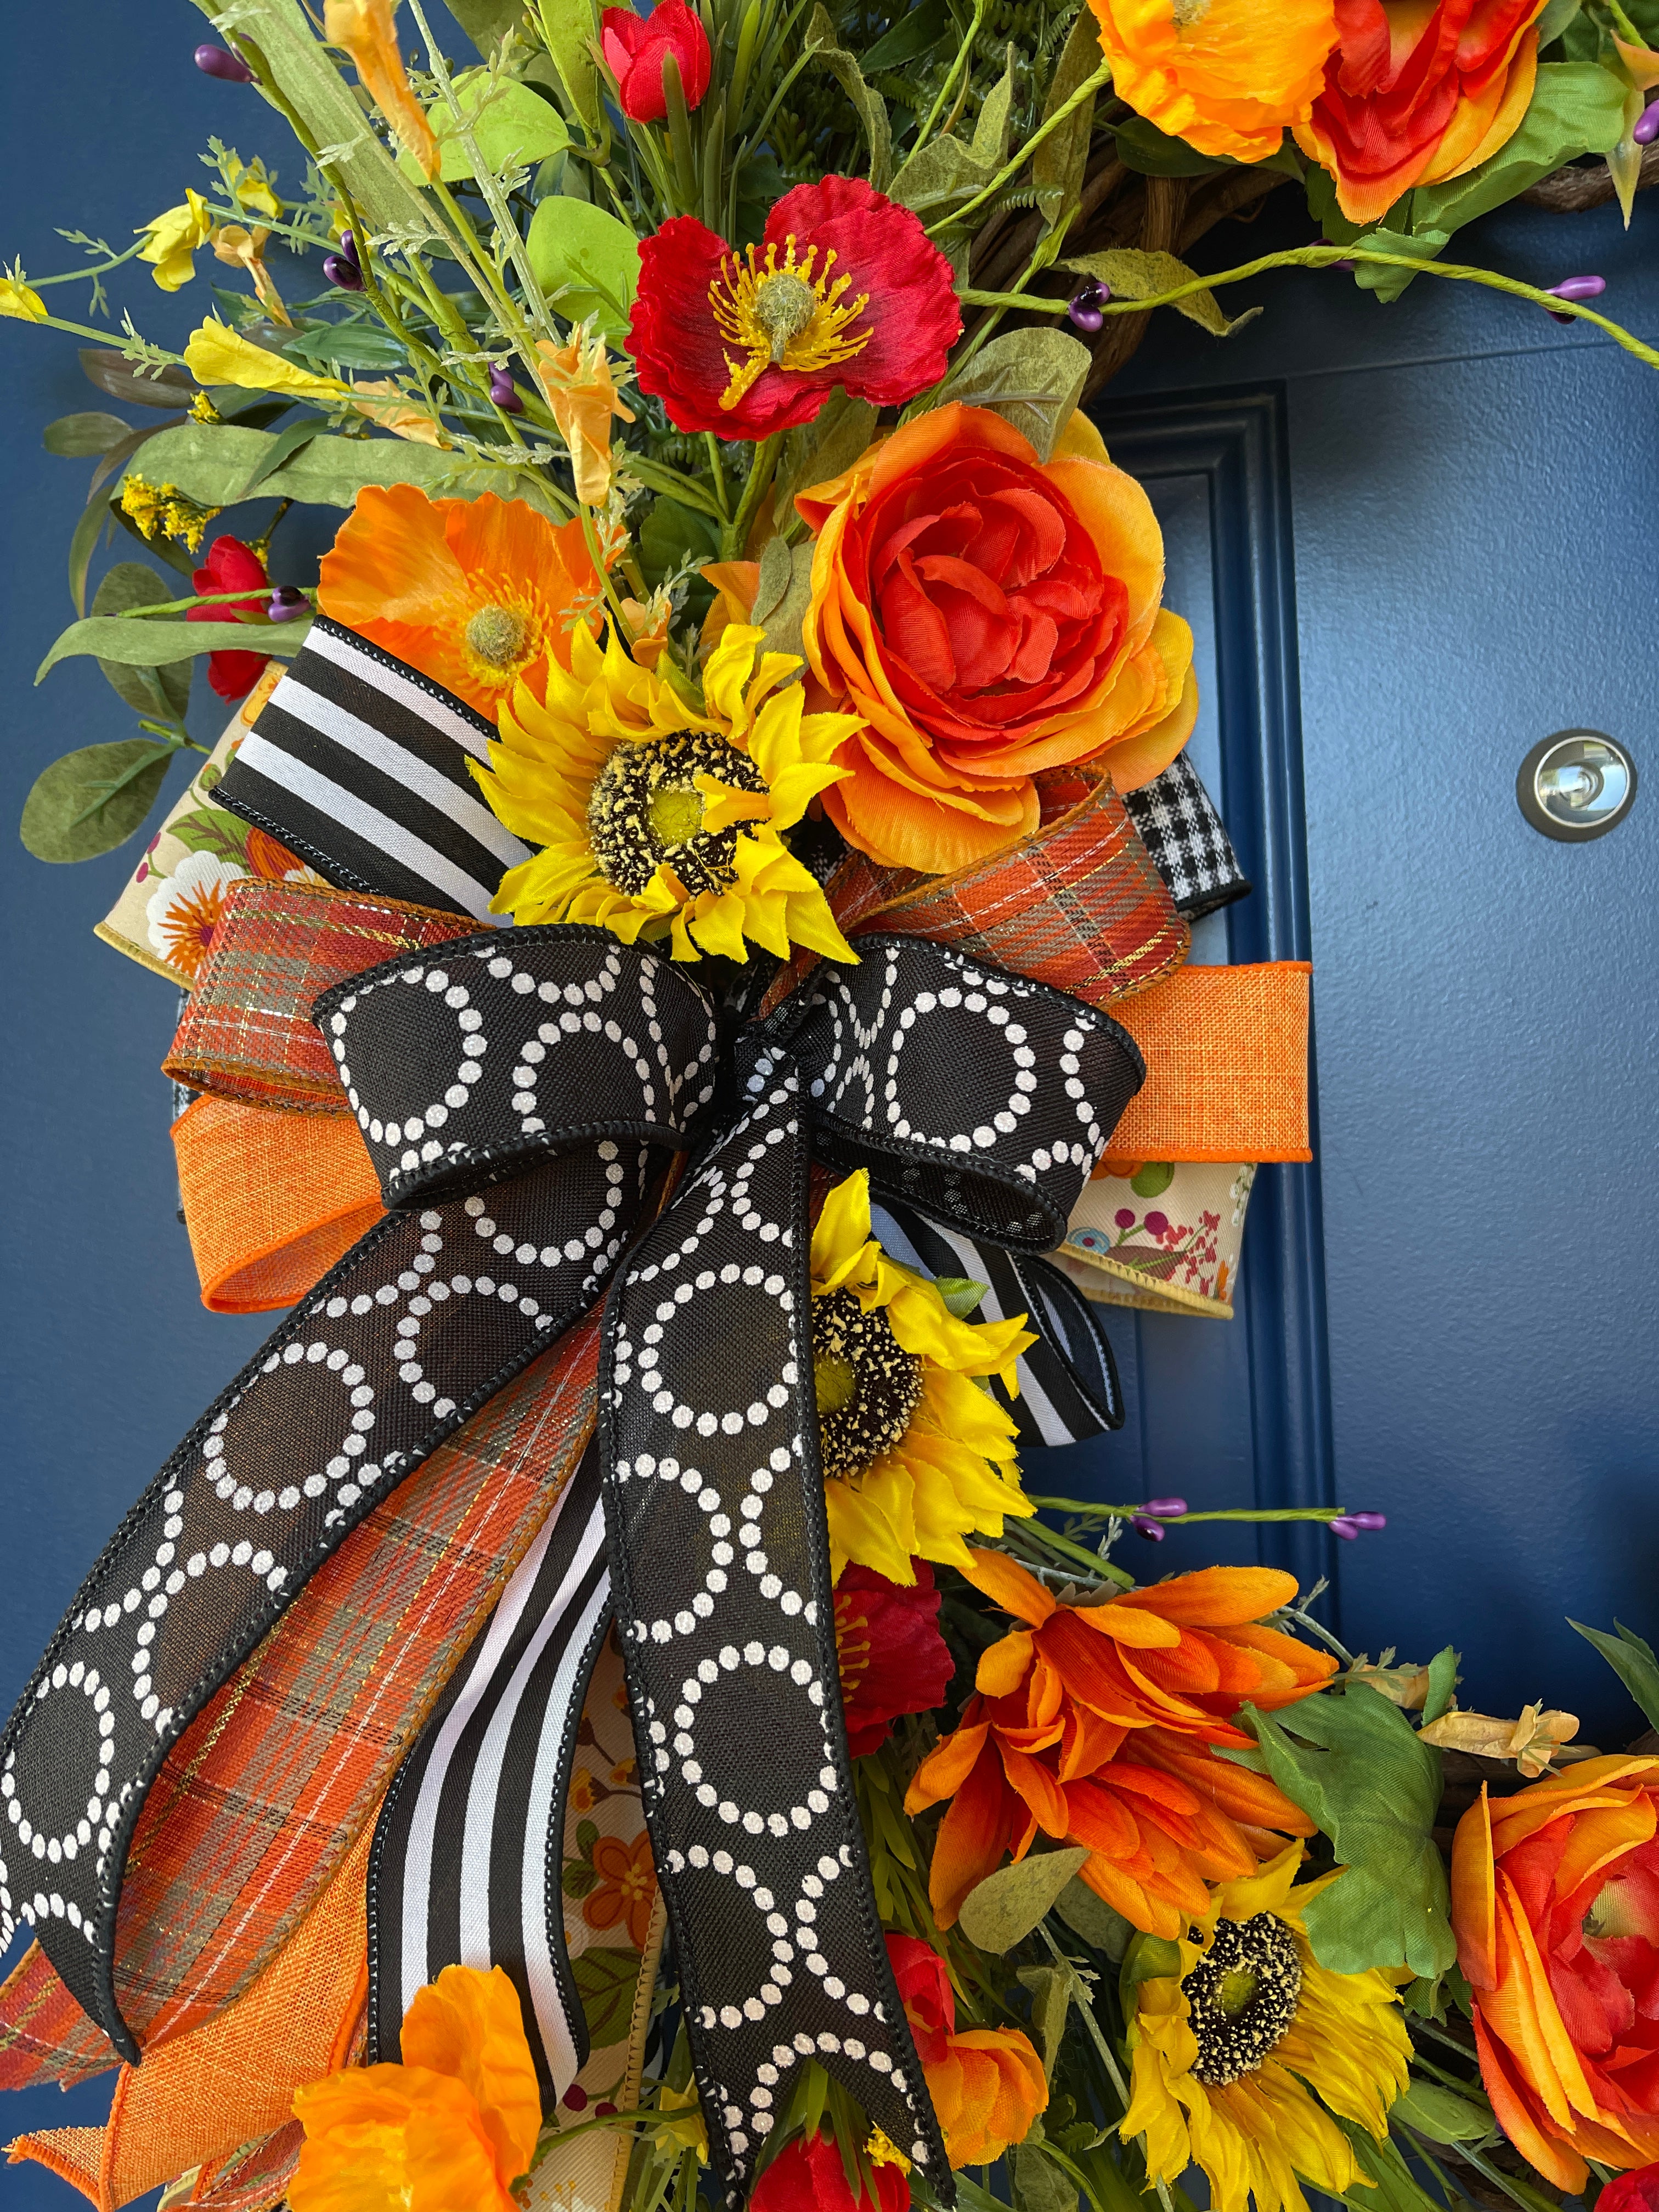 Close Up Detail of Bow Featuring Black and White Polka Dot Circles Ribbon, Fall Orange, Green and Gold Plaid Ribbon, Solid Orange Ribbon, Black and White Gingham Ribbon, Black and White Striped Ribbon along with Orange and Red Poppies, Sunflowers and Ranunculus 